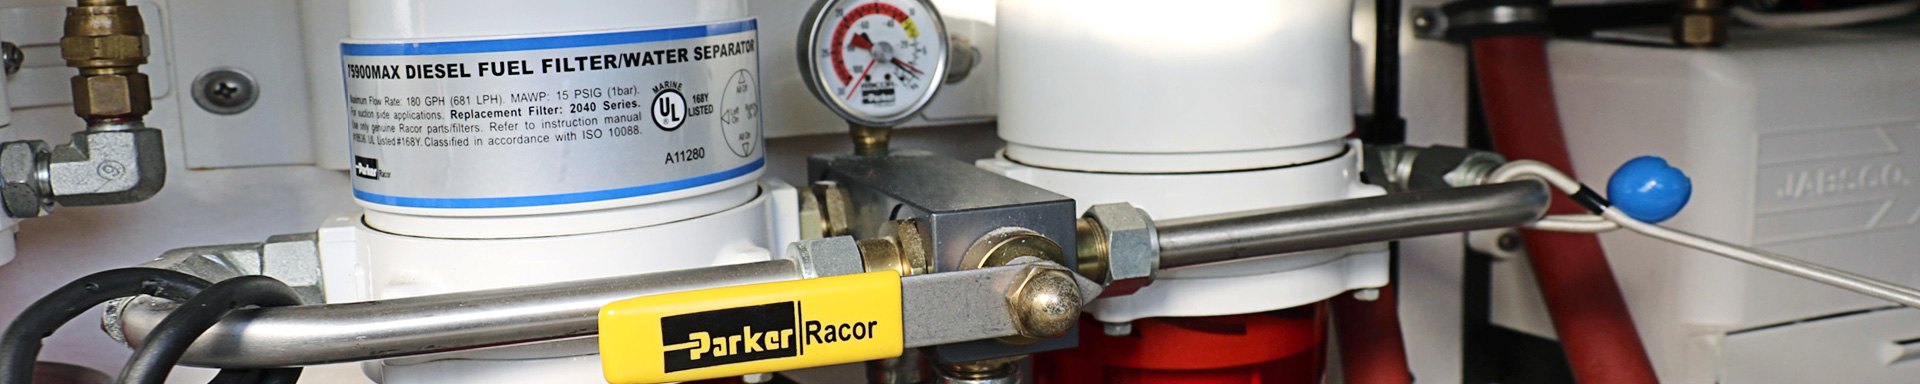 Racor Division Steering & Control Systems